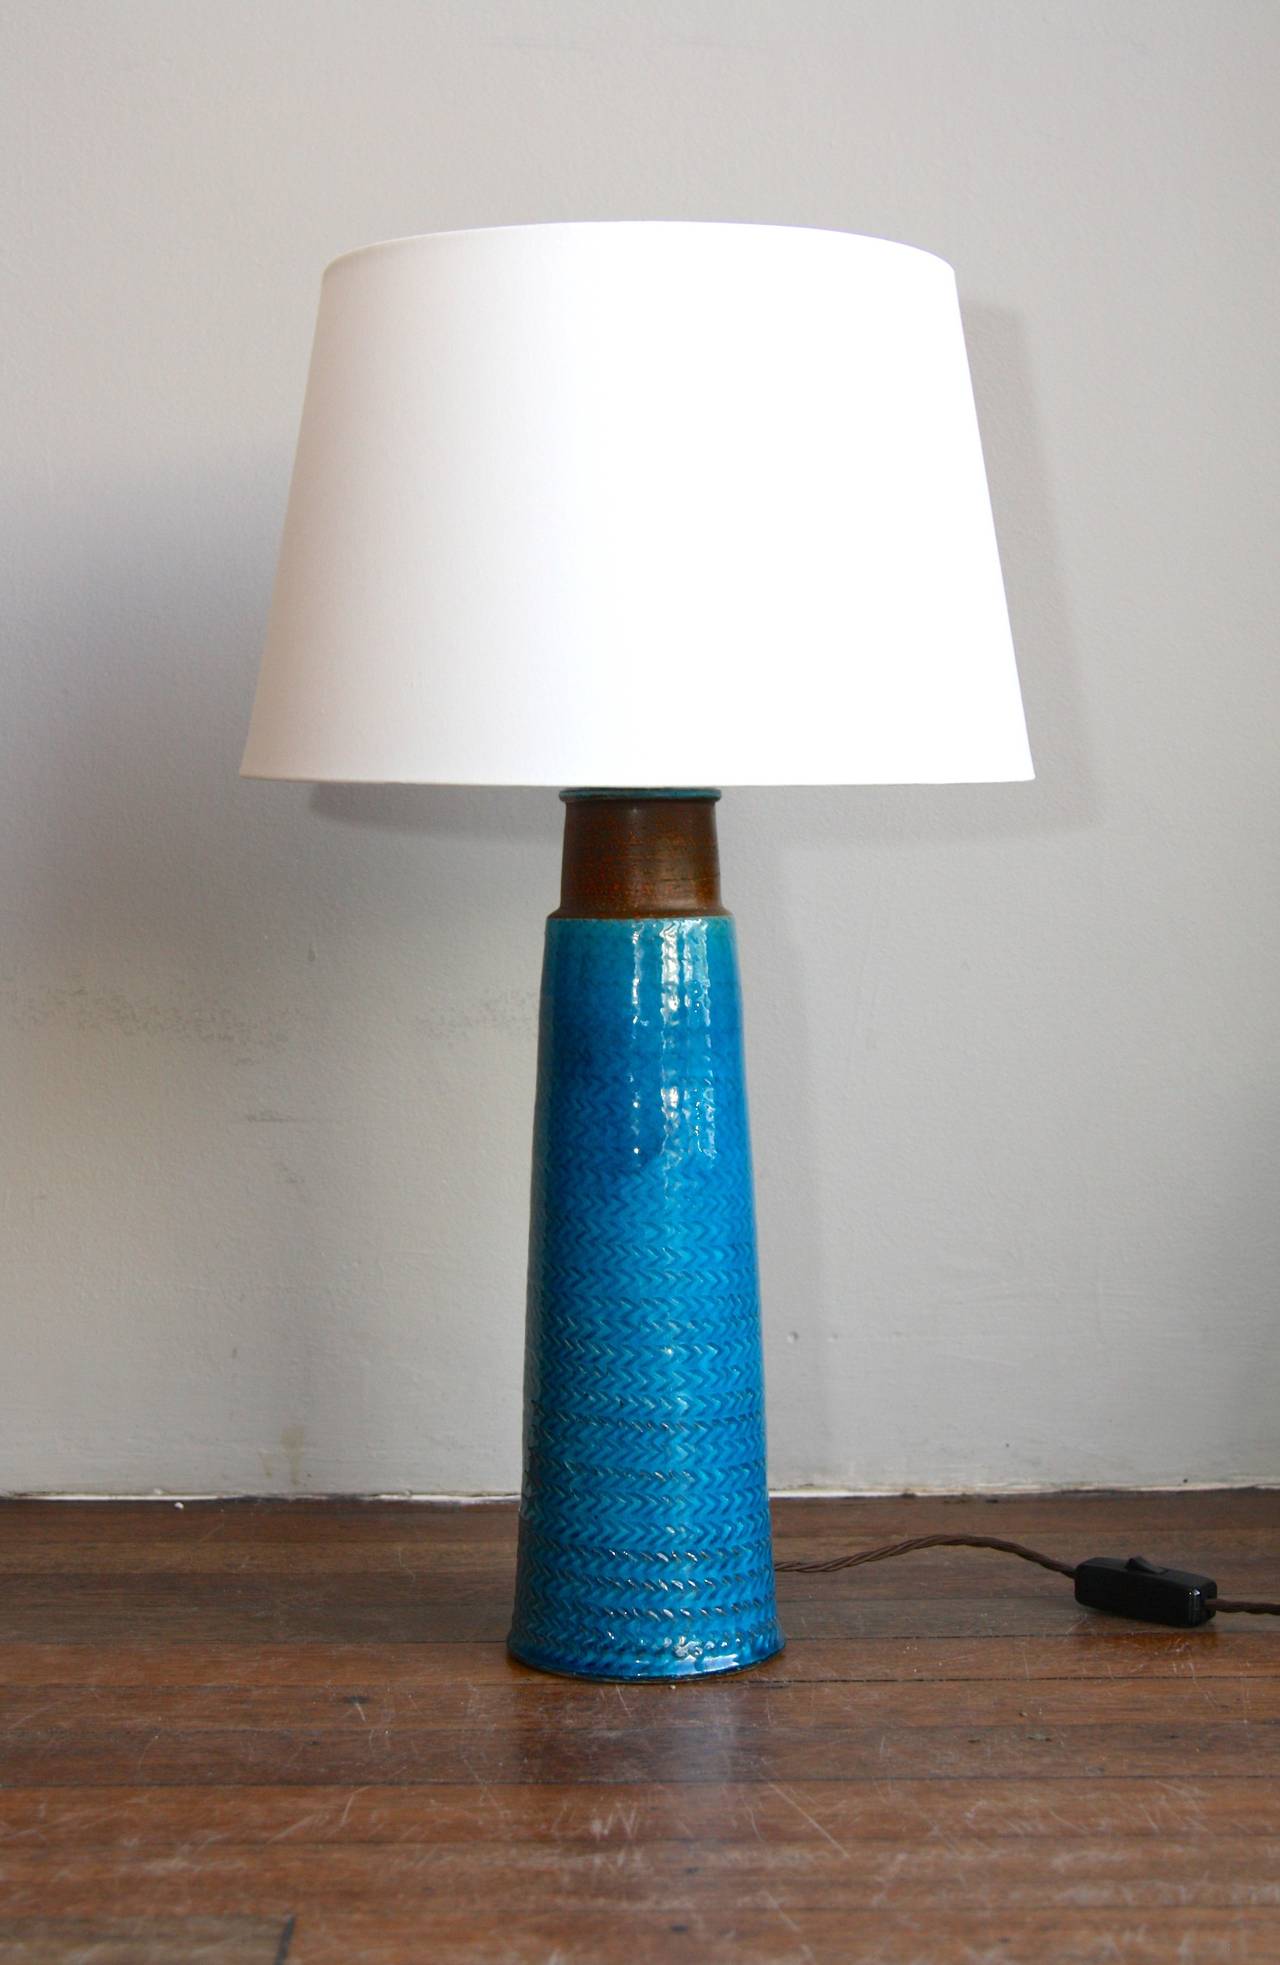 Herman Kahler's workshop. Great hand-thrown table lamp with a turquoise  textured glaze. Topped by a new white cotton shade